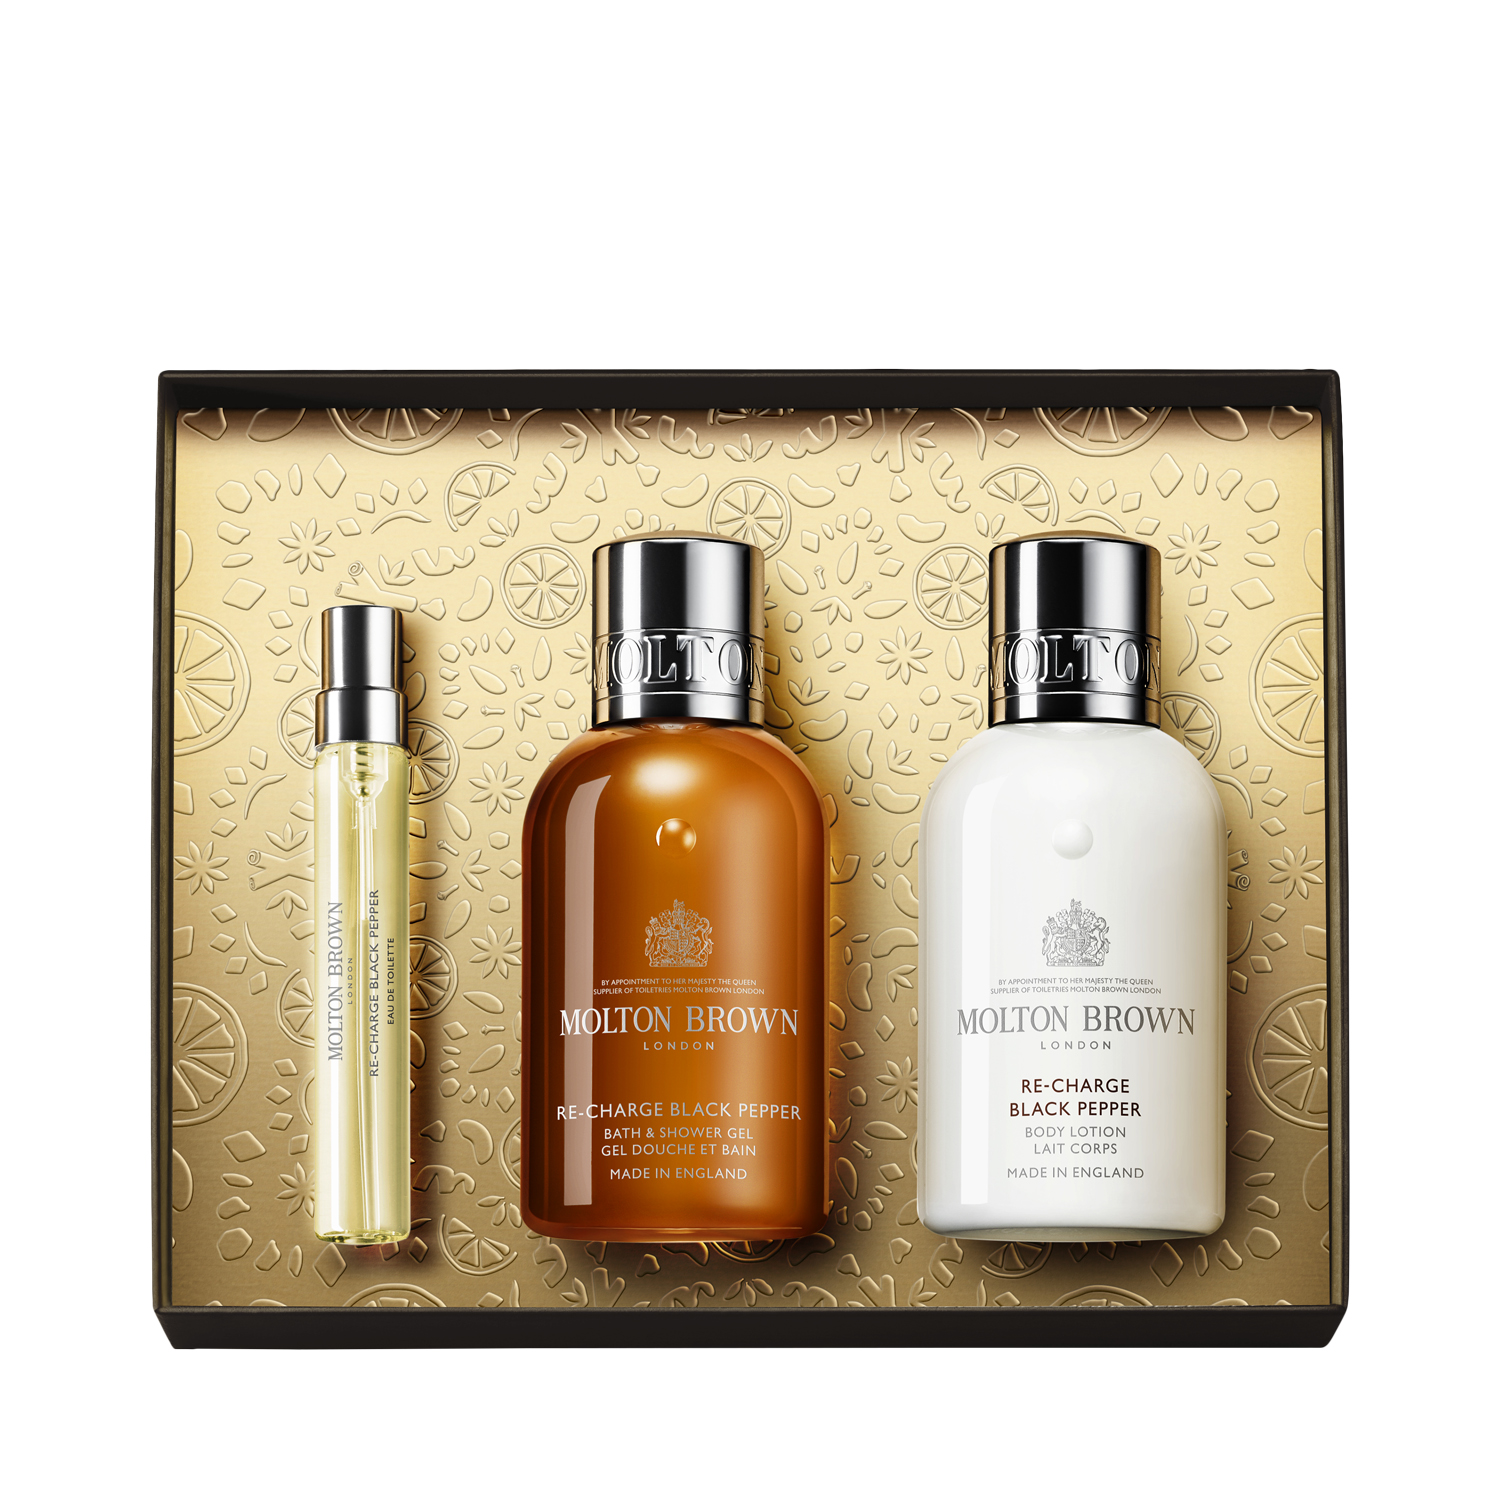 Molton Brown - Re-charge Black Pepper Fragrance Collection - Limitiertes 3-tlg. Geschenk Set